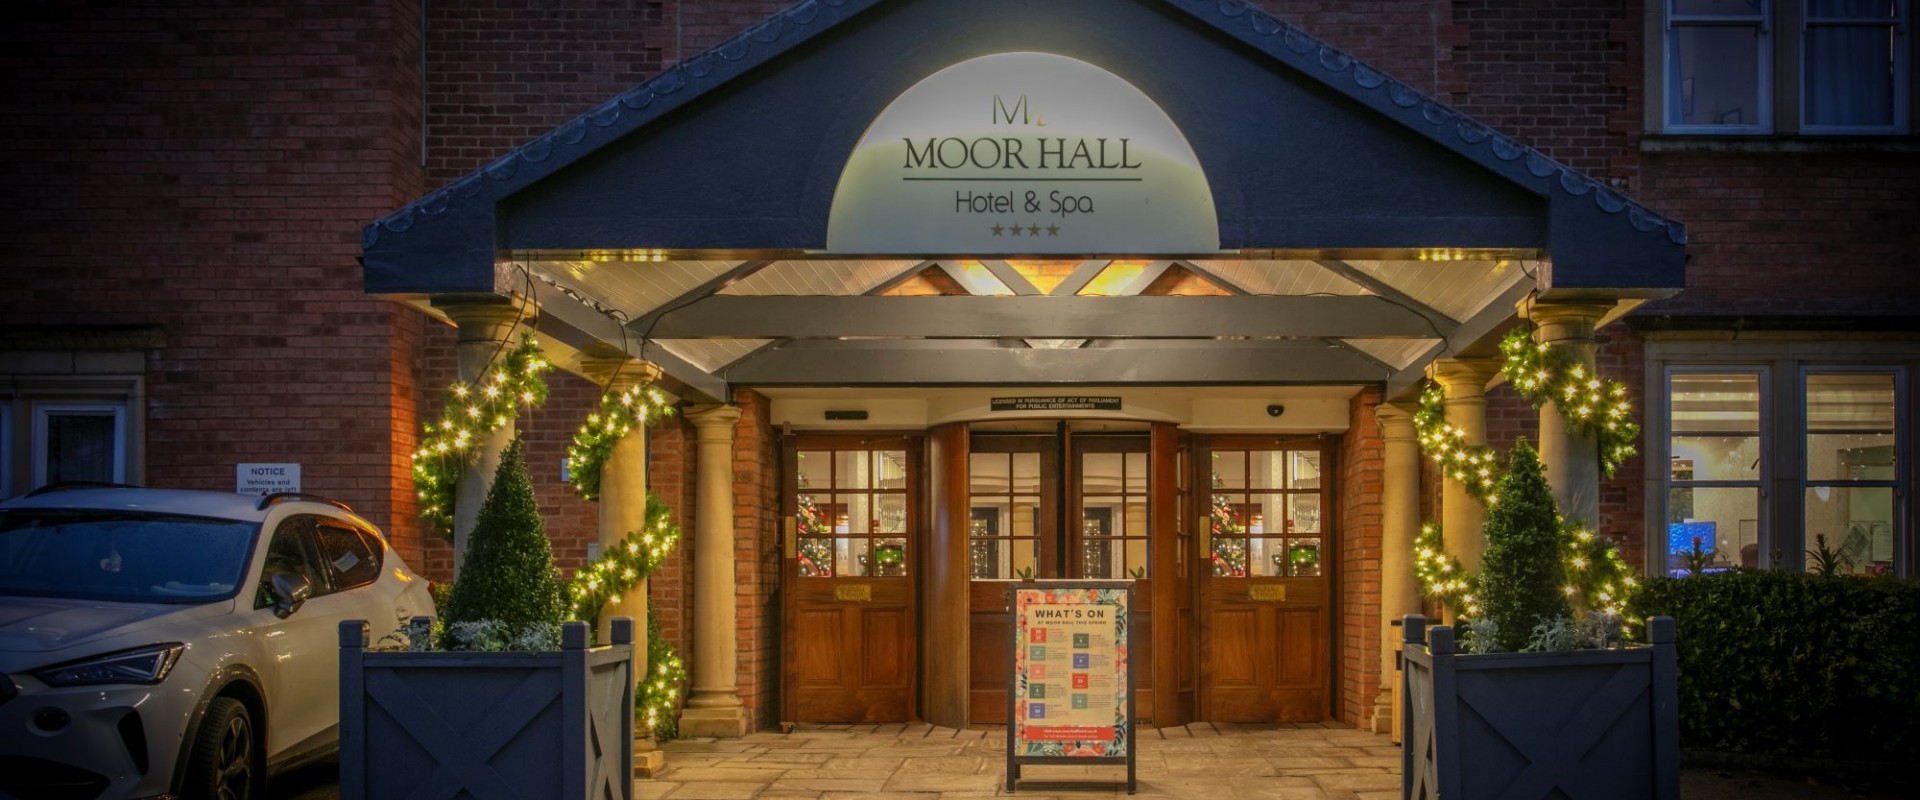 Moor Hall front exterior at Christmas 2